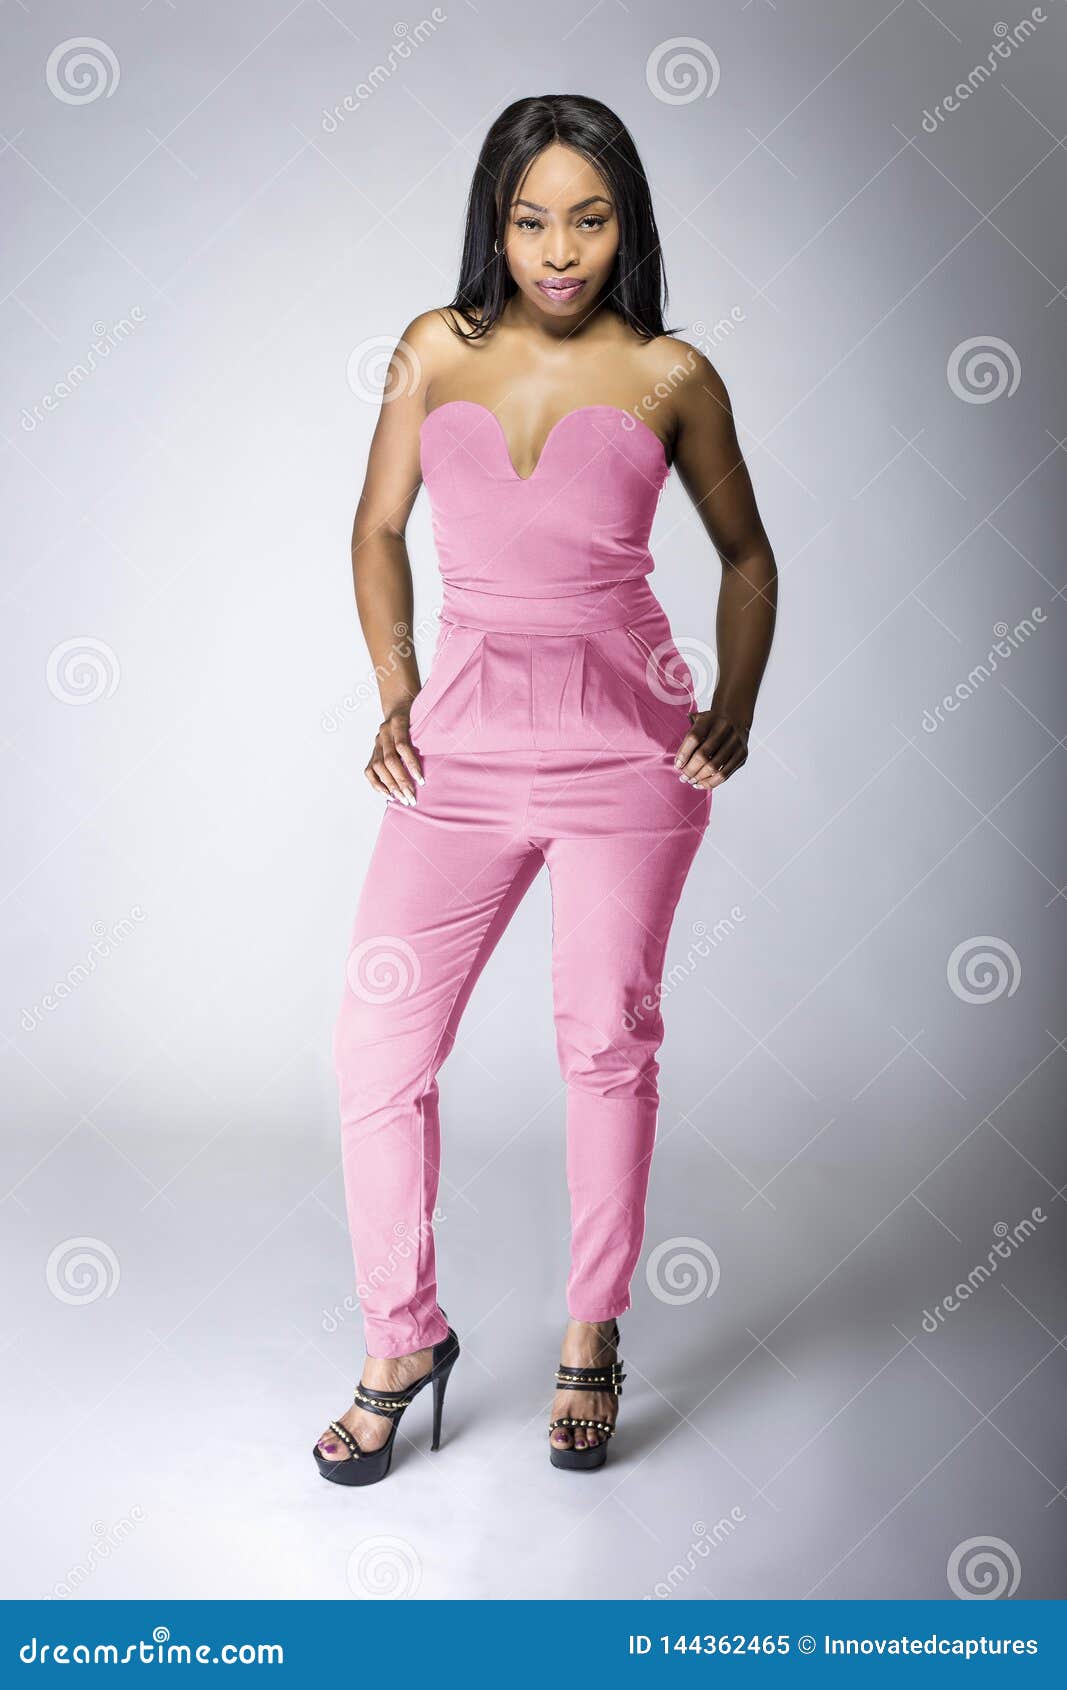 Black Female Fashion Model Wearing Pink Outfit Stock Image - Image of ...